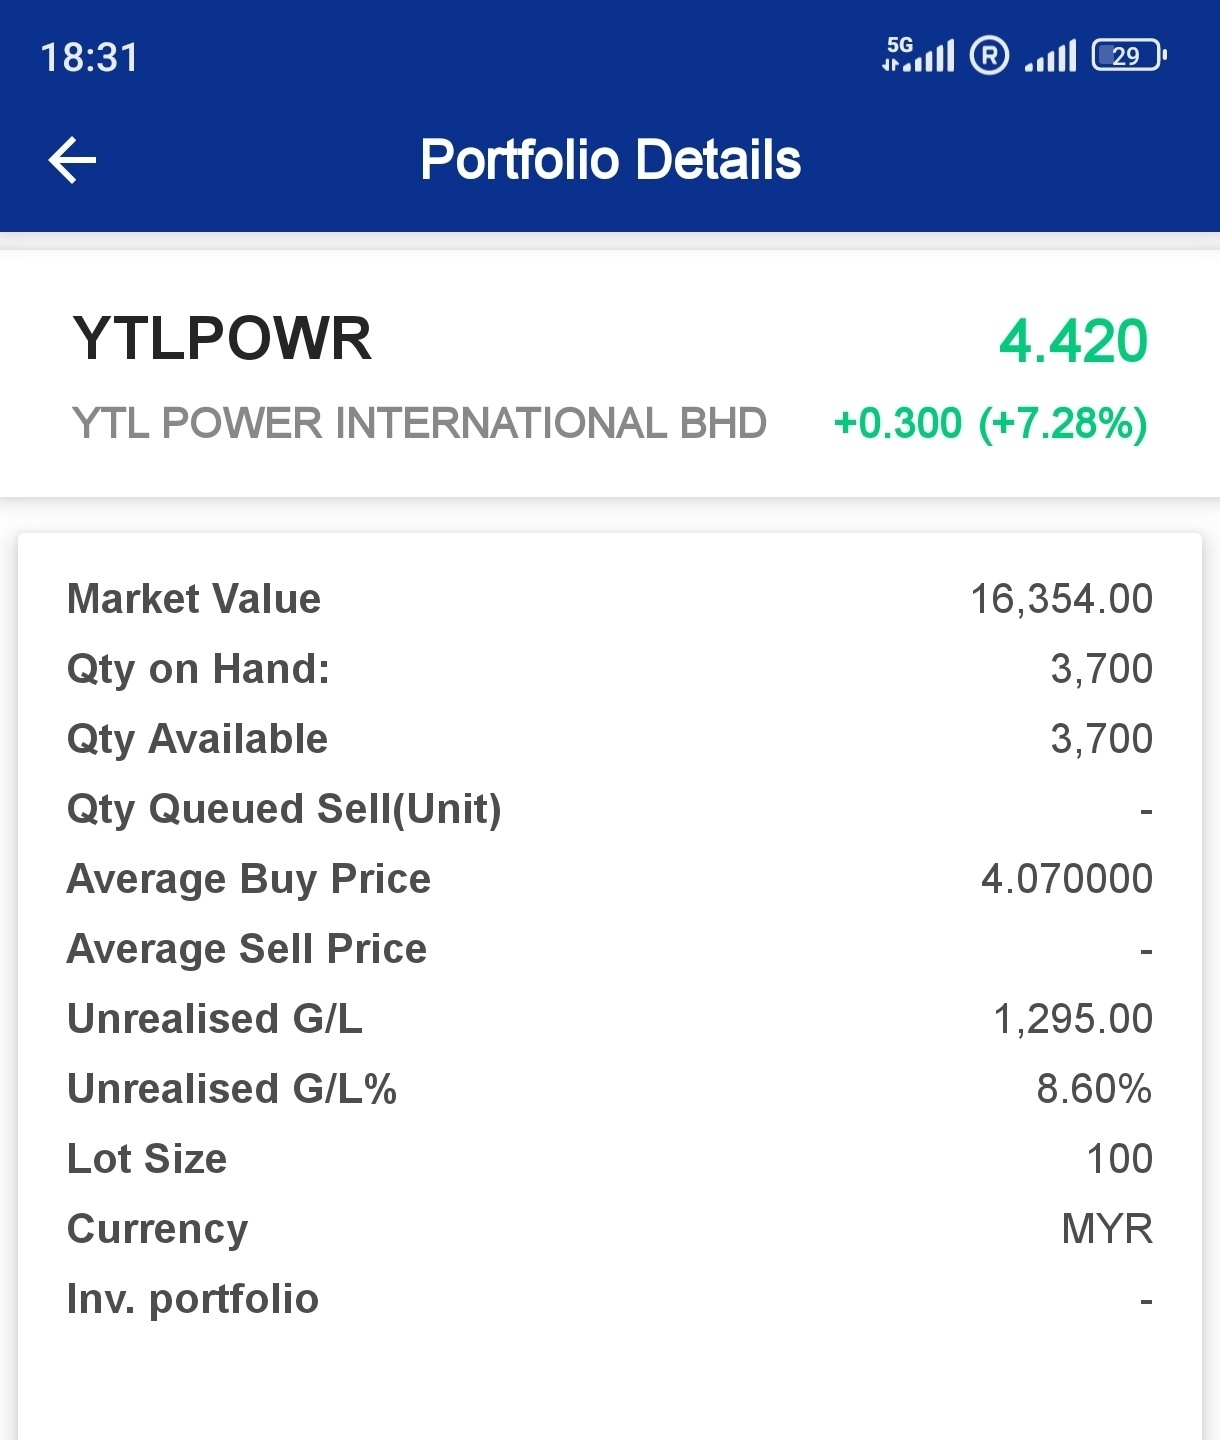 Another lucky trade on other platform within 2 days. [Smile] Congrats those punt on YTL!  I like Moomoo & it seems most of my trades are now here, but still nee...